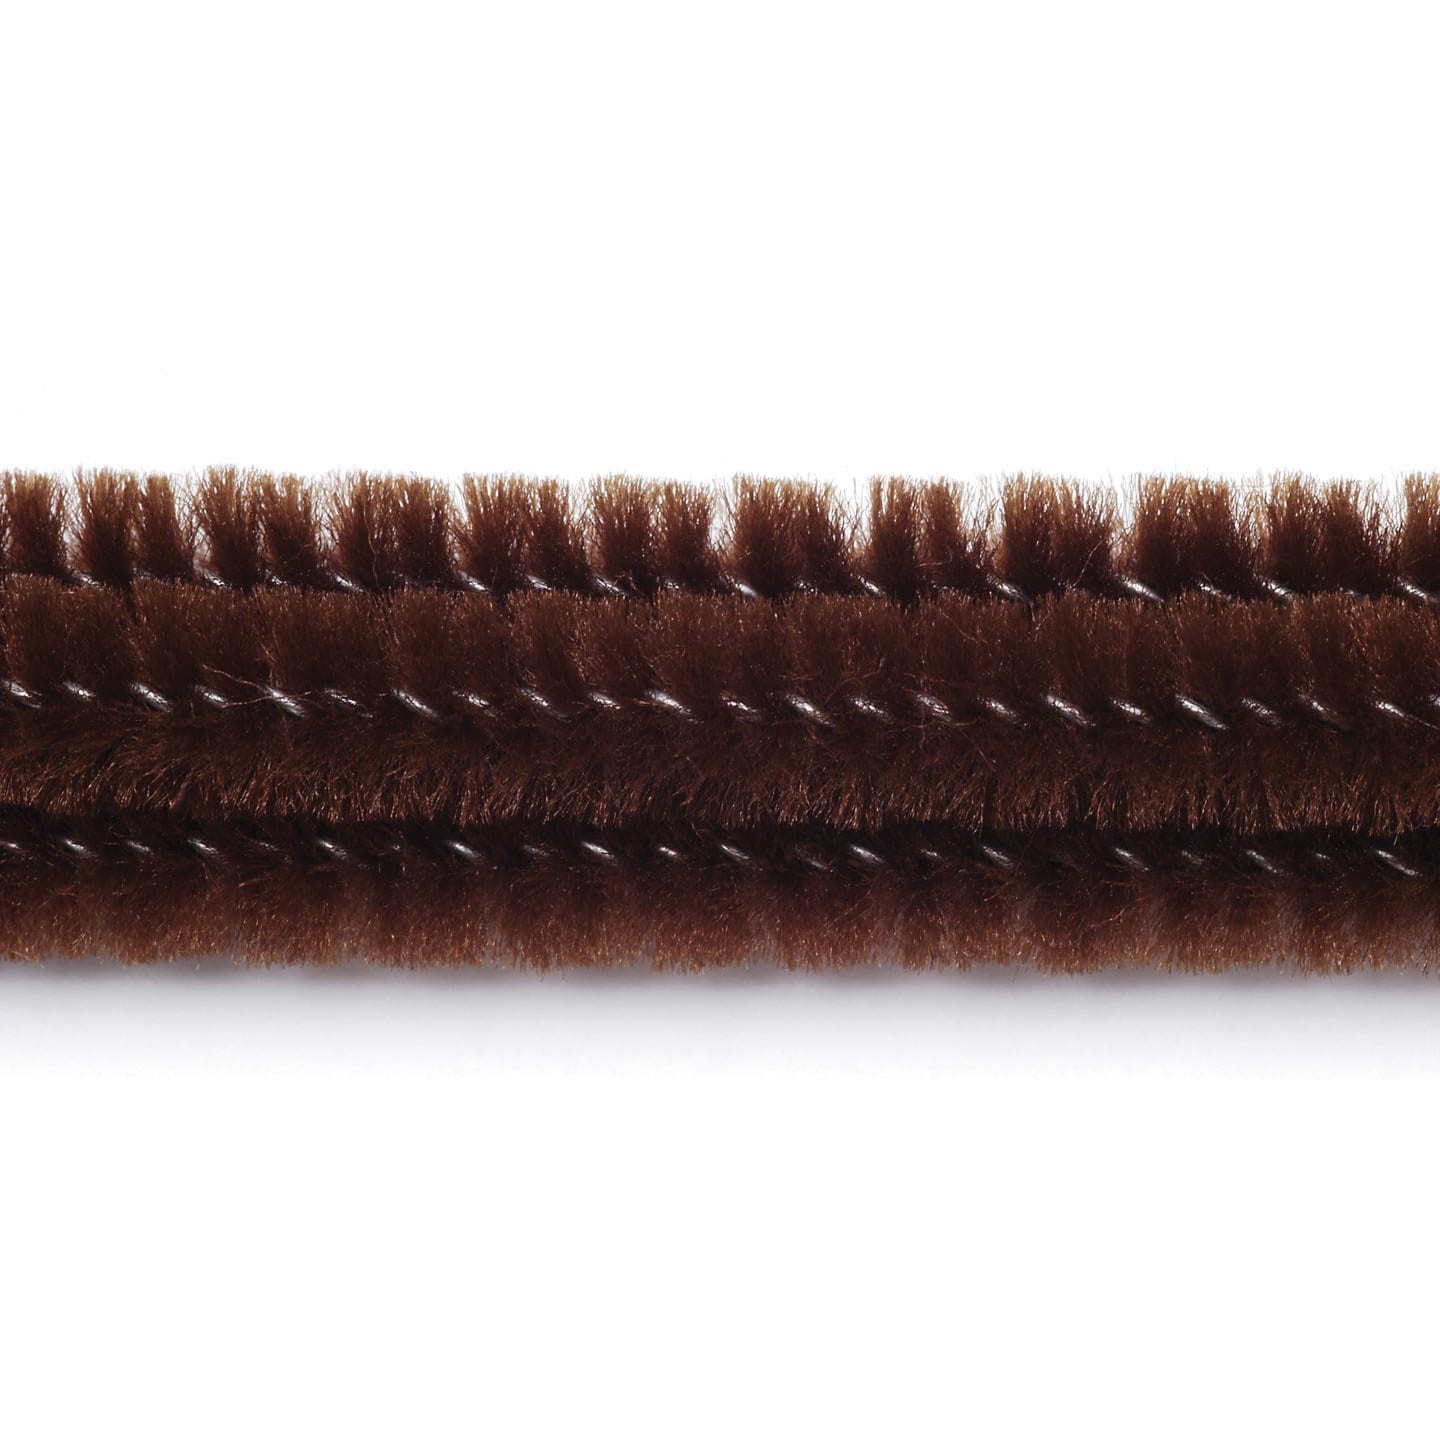 100 Pieces Pipe Cleaners Chenille Stem, Light Brown Pipe Cleaners